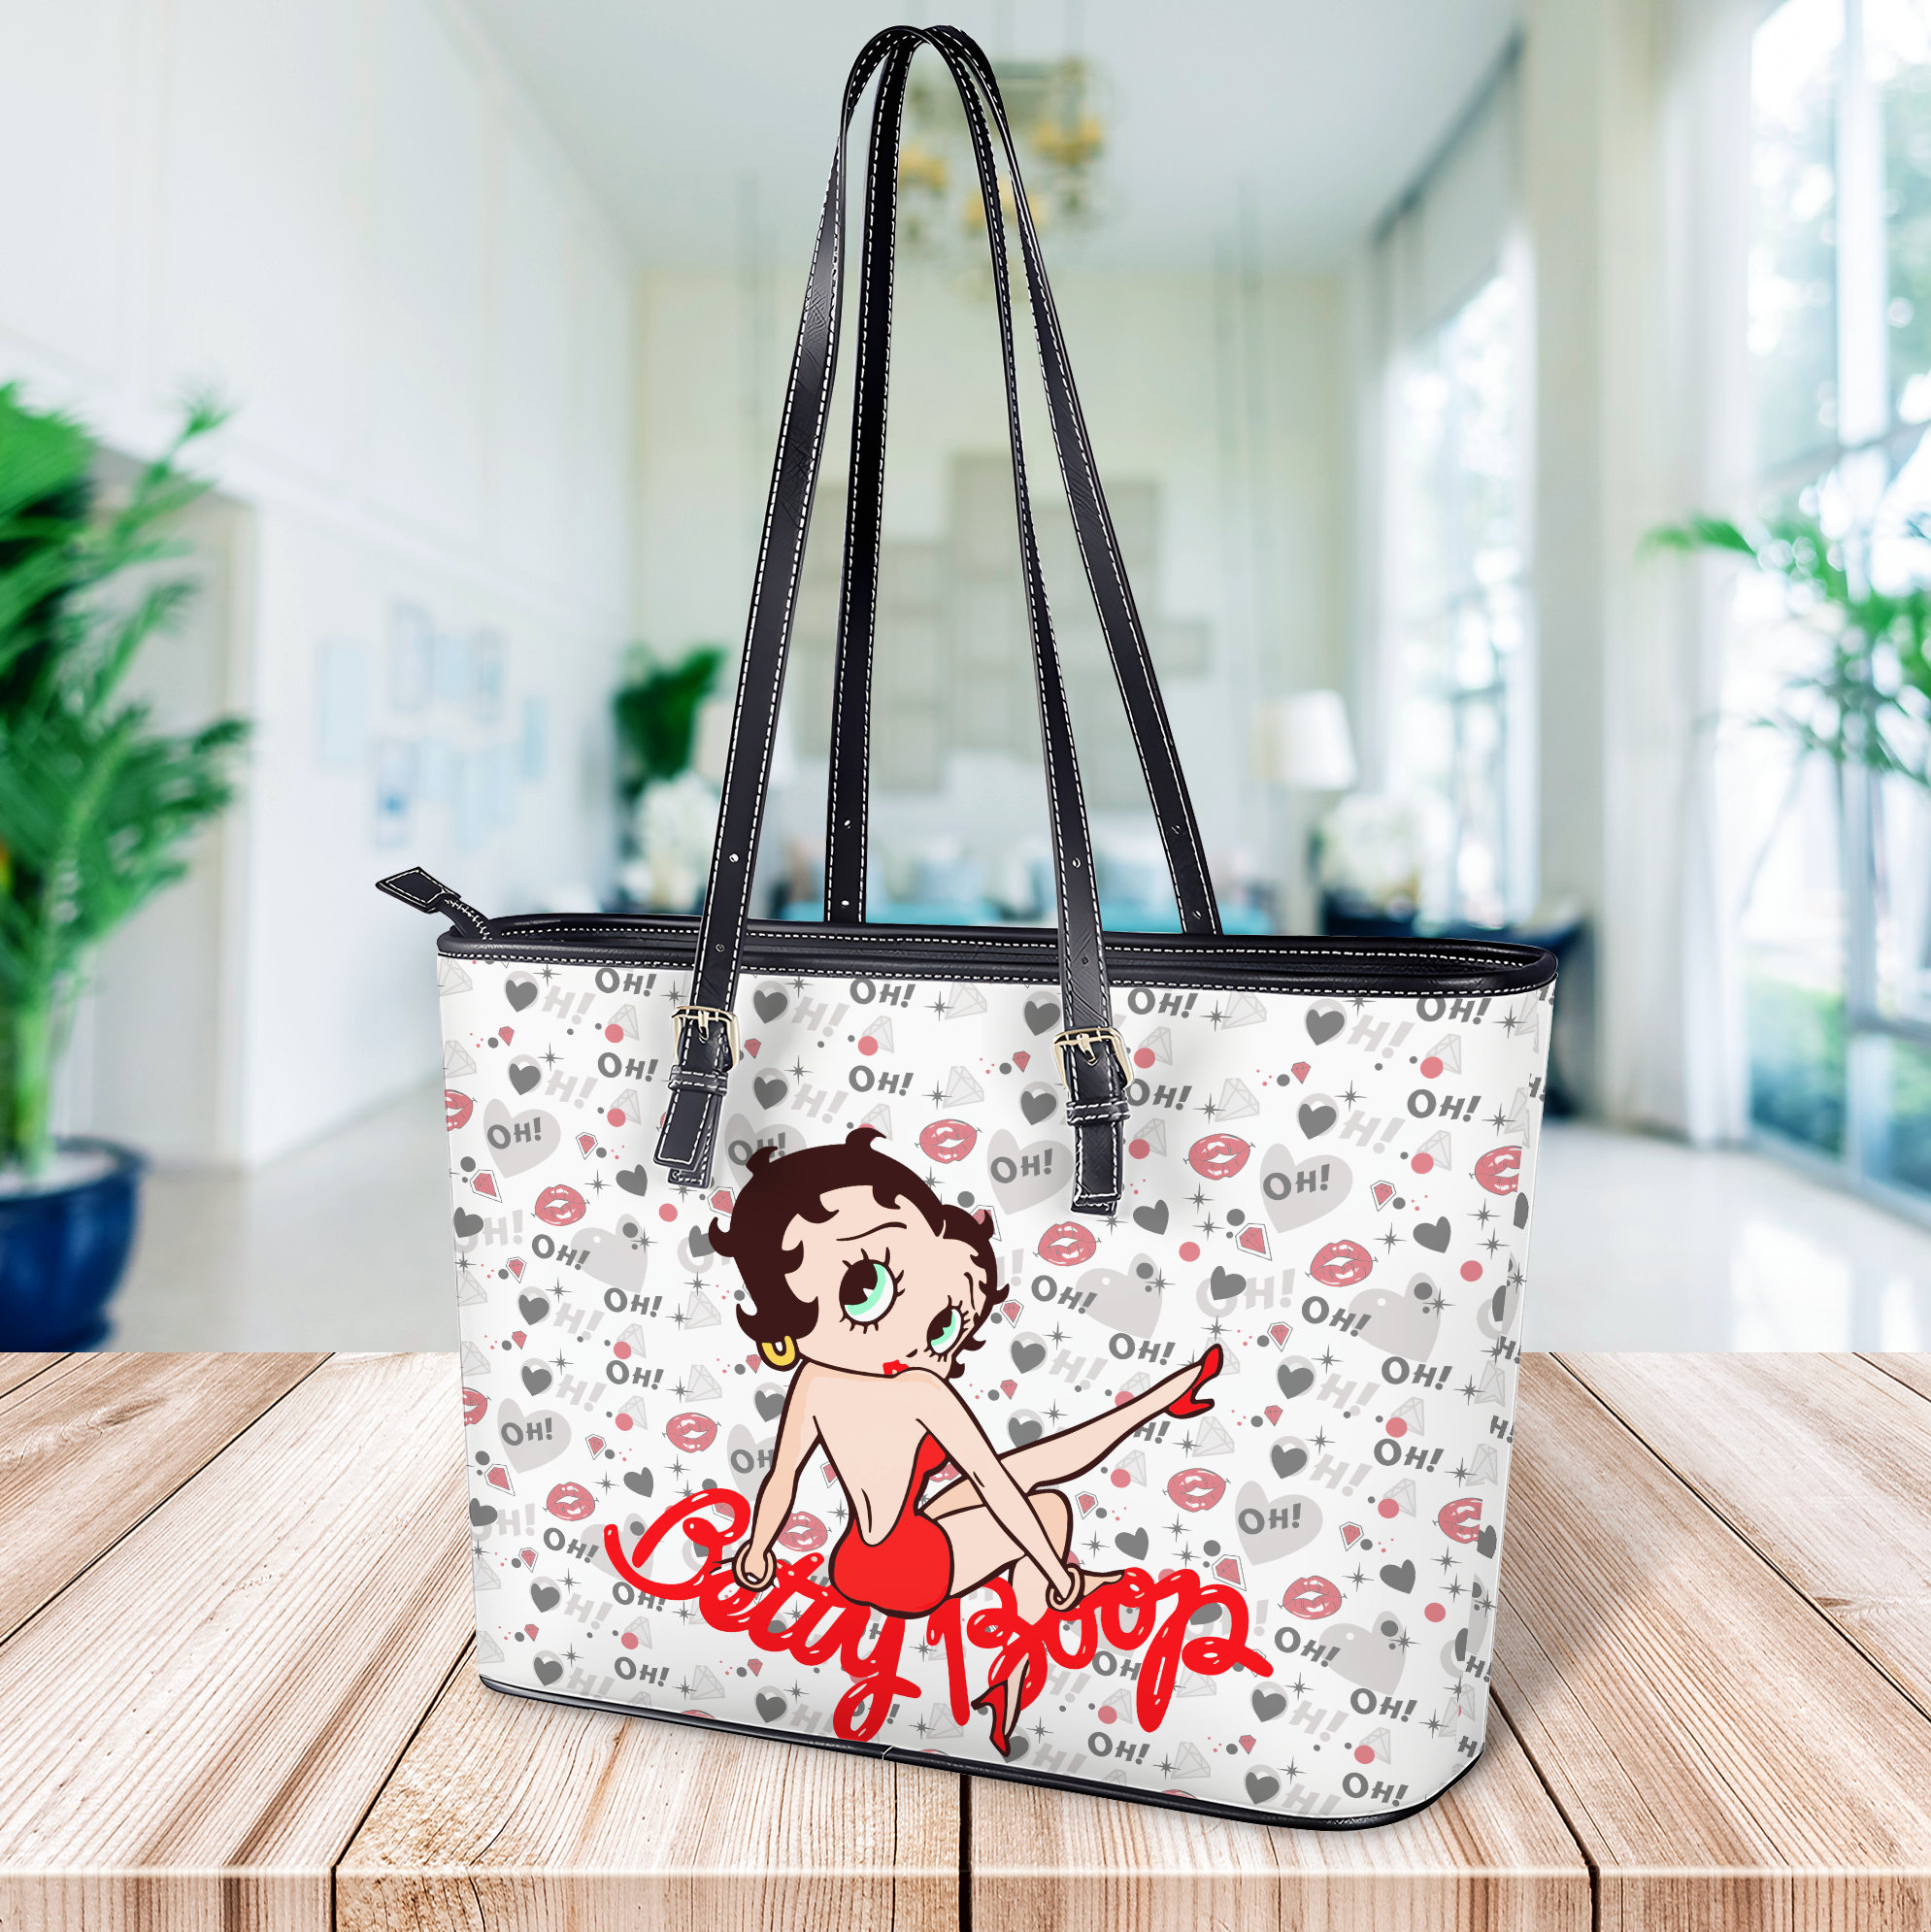 Betty Boop Leather Bag, Gift for women, Gift for mom